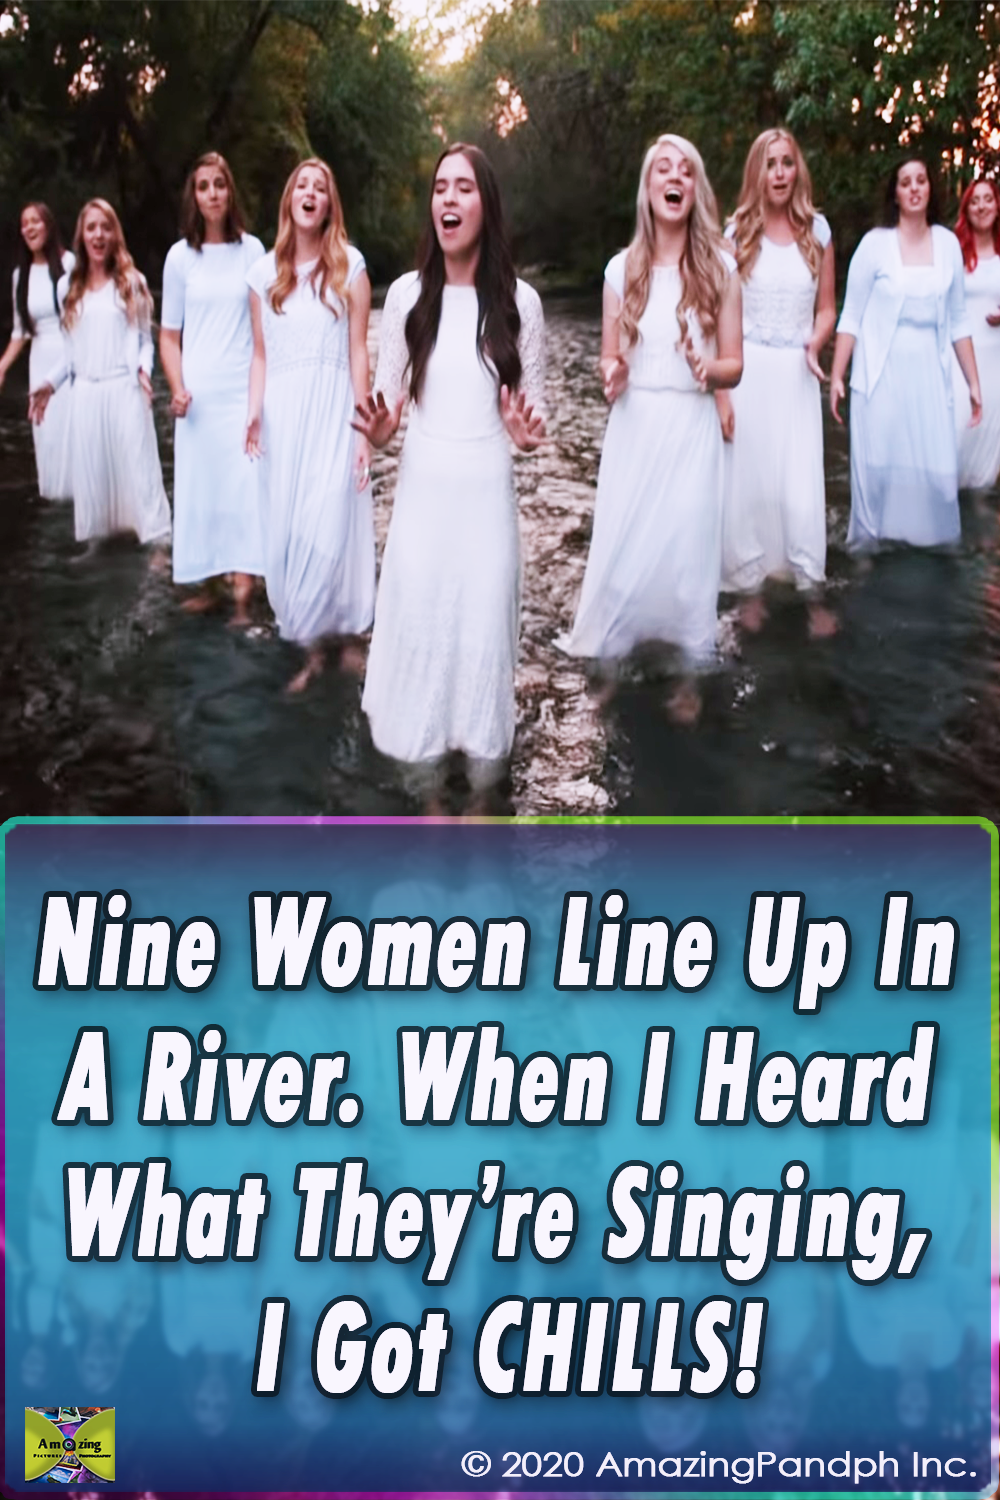 viral video,going viral,song,beautiful song,girls song,beautiful group,amazing voice,beautiful voices,viral,most viewed video,most listened song,song in nature,music in nature,song in a forest,song in a river